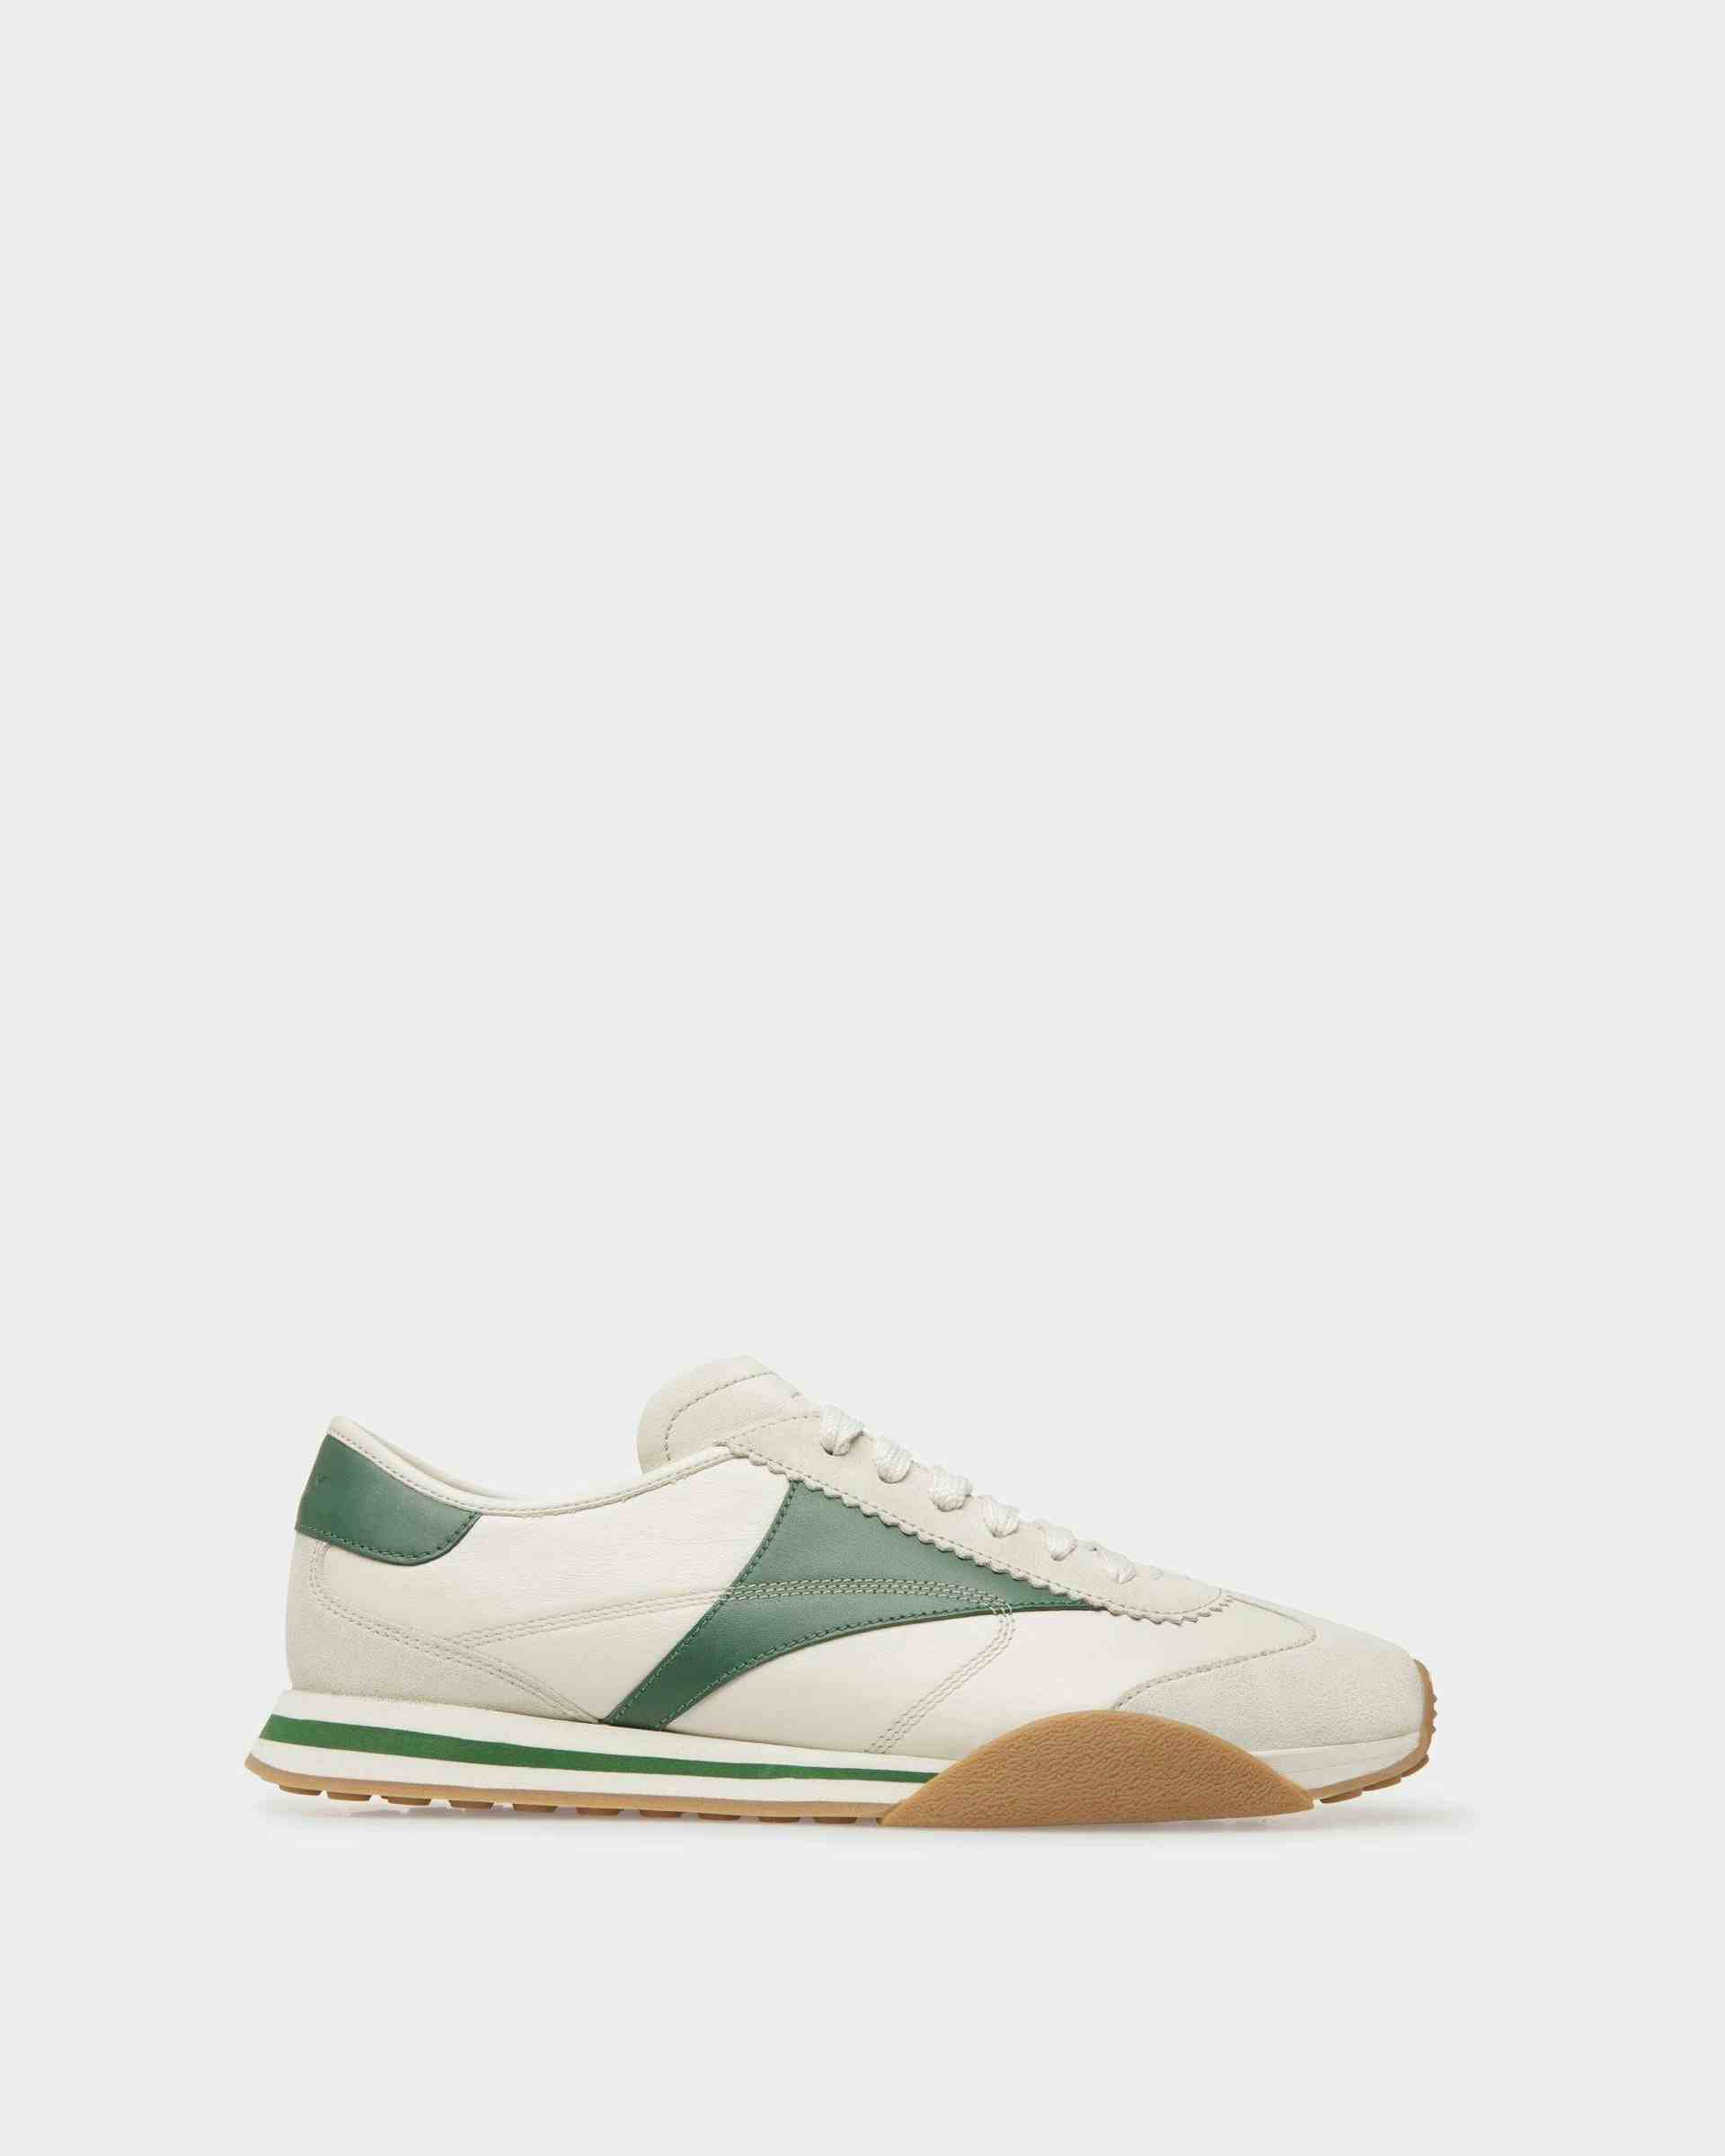 Sussex Sneakers In Dusty White And Kelly Green Leather - Men's - Bally